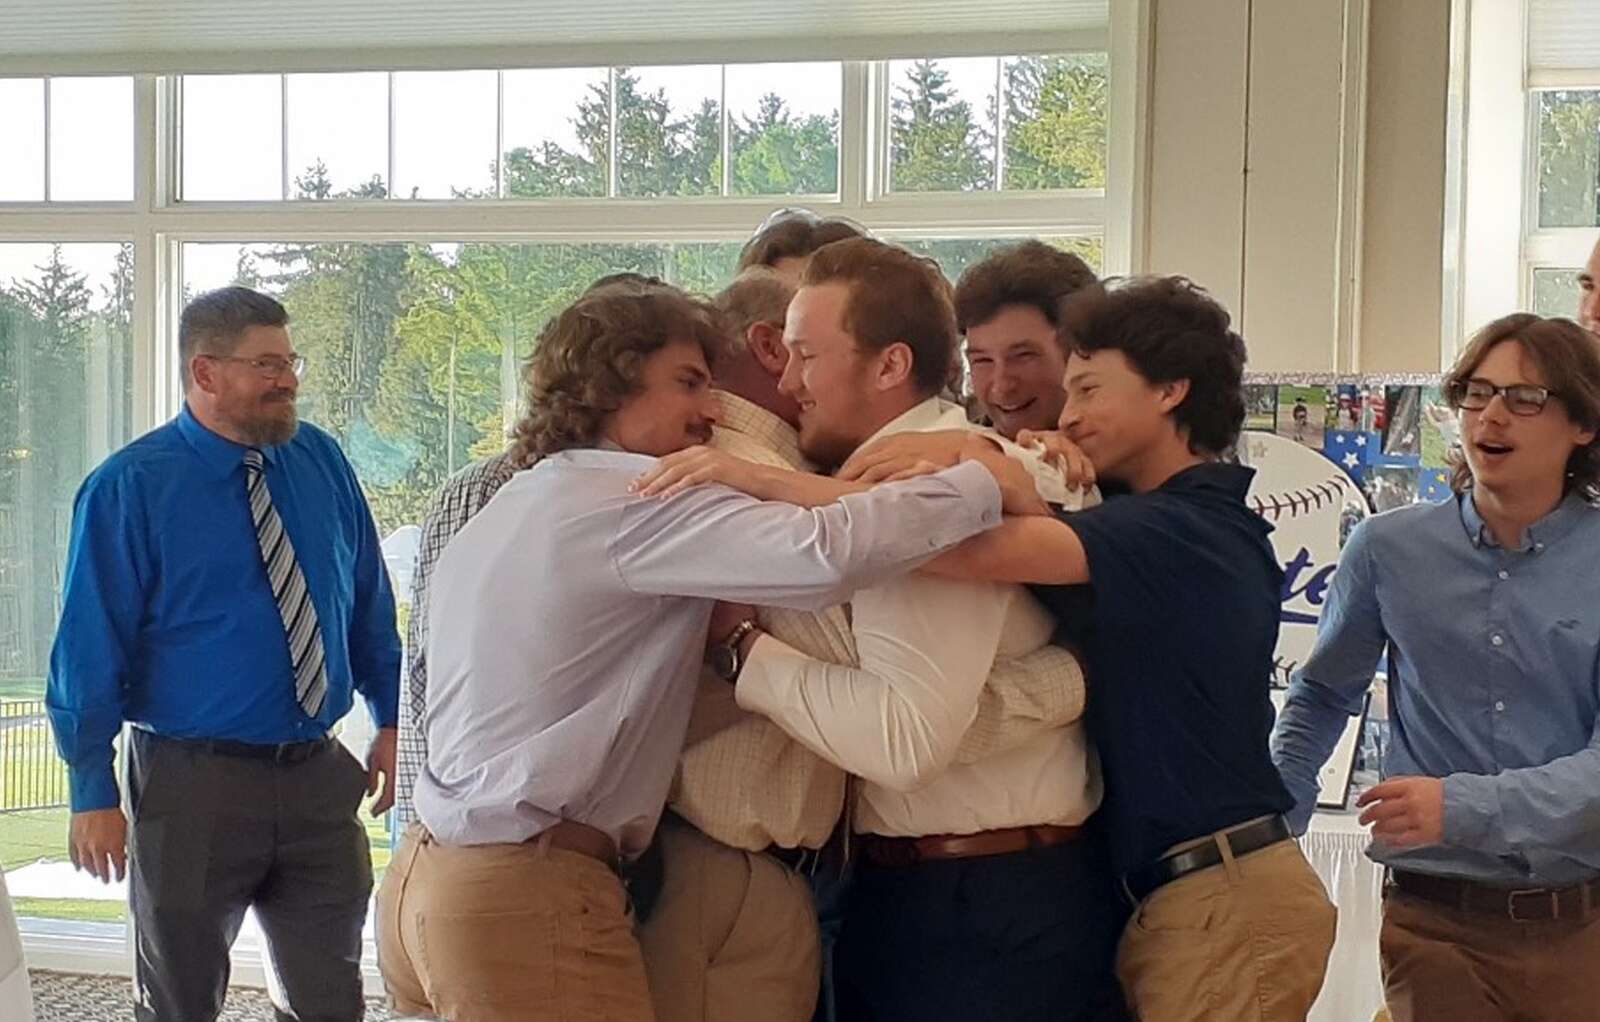 Members of the Knoch baseball team embrace coach Bill Stoops at their end-of-season banquet. From left to right are: Angelo DeLeonardis, Bill Stoops, Eli Sutton, and Dathan Gillis. Submitted photo